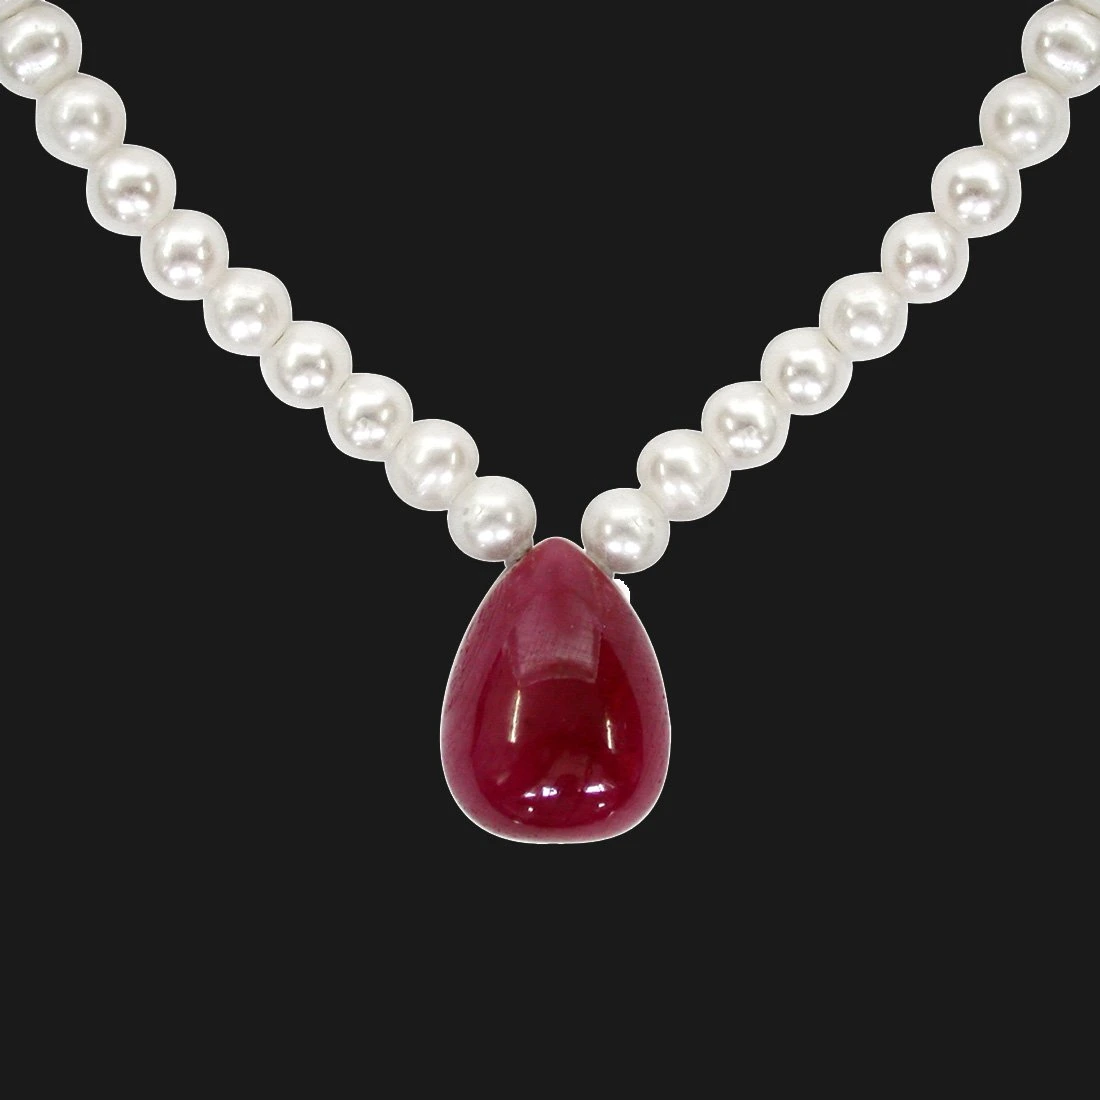 Lovely Ruby  - Single Drop Ruby & Freshwater Pearl Necklace for Women (SN129)